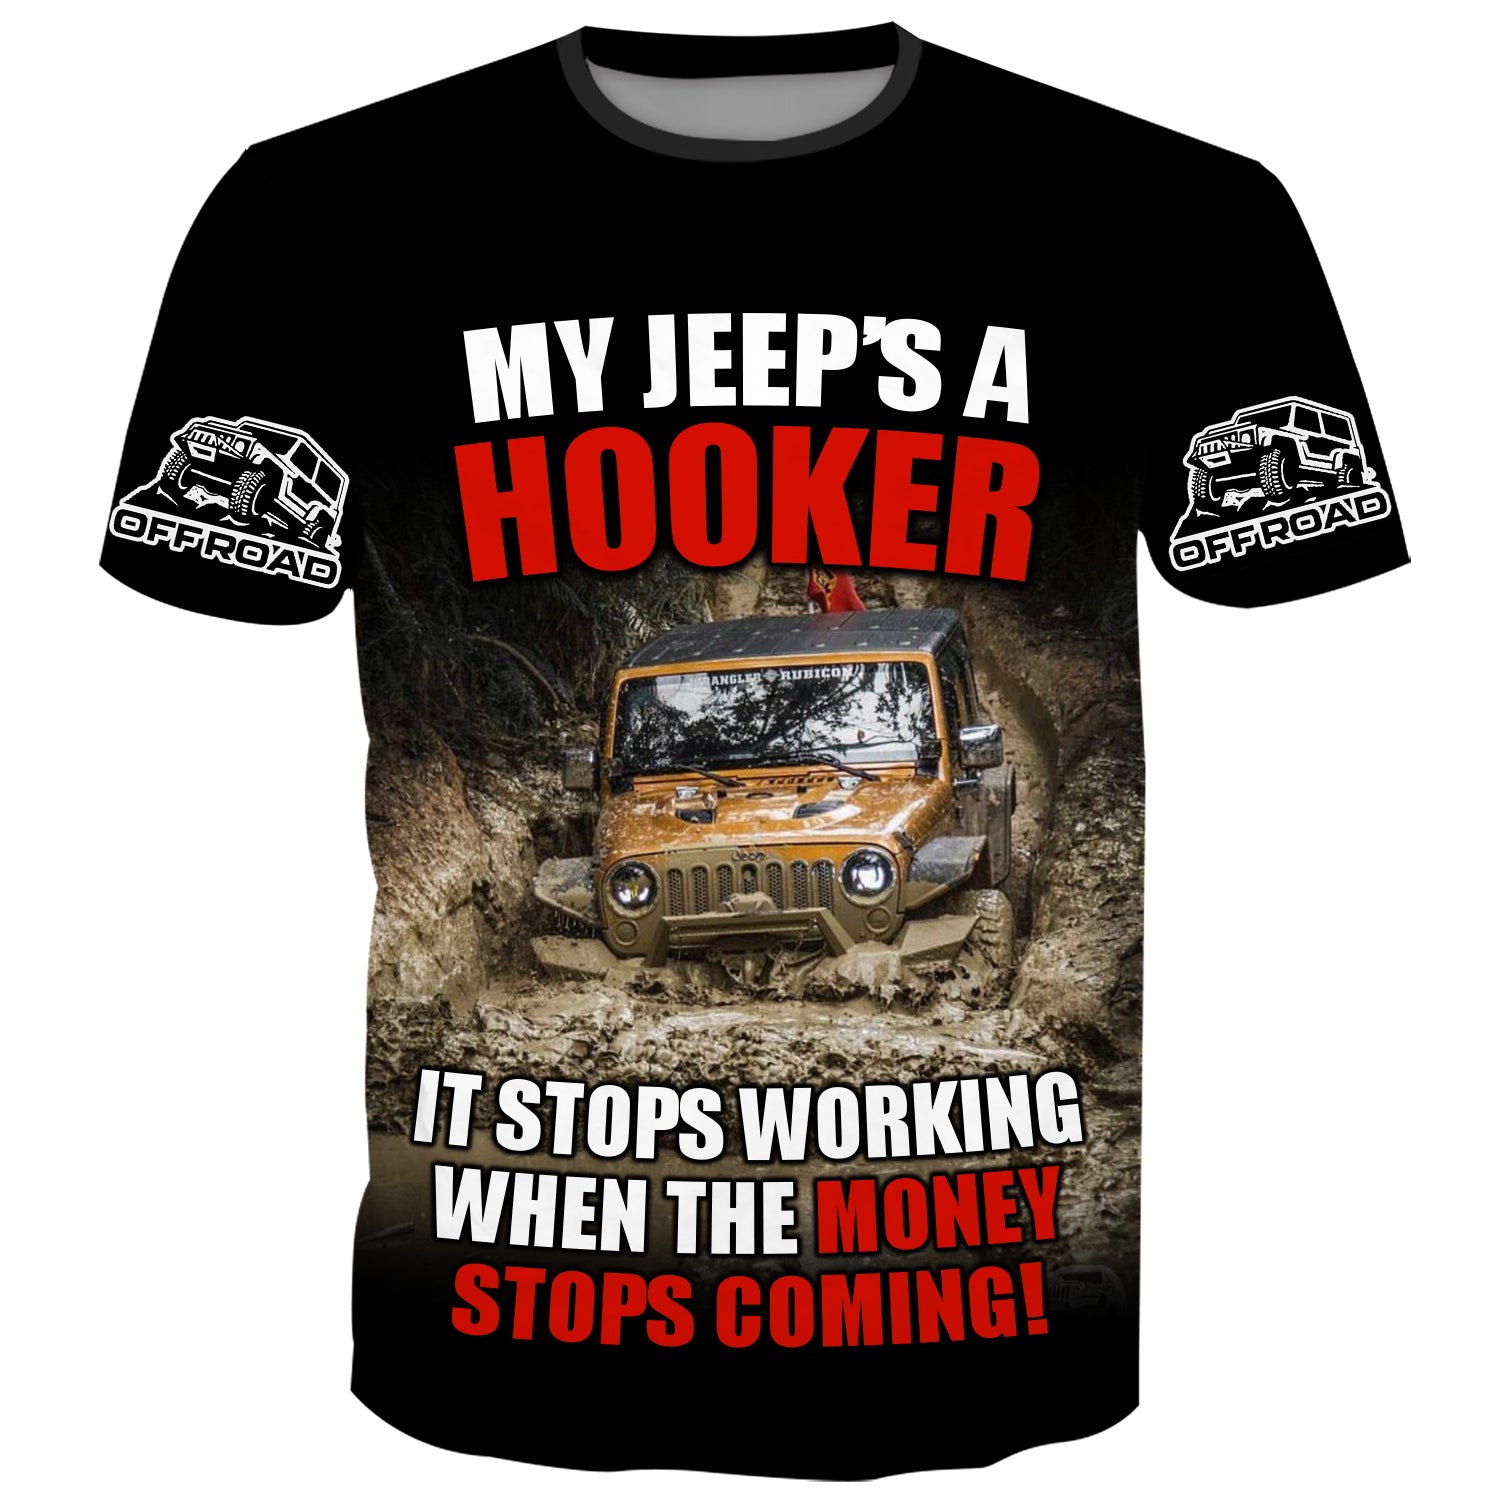 My Jeep's a Hooker Its stop working when the money stops coming - T-Shirt